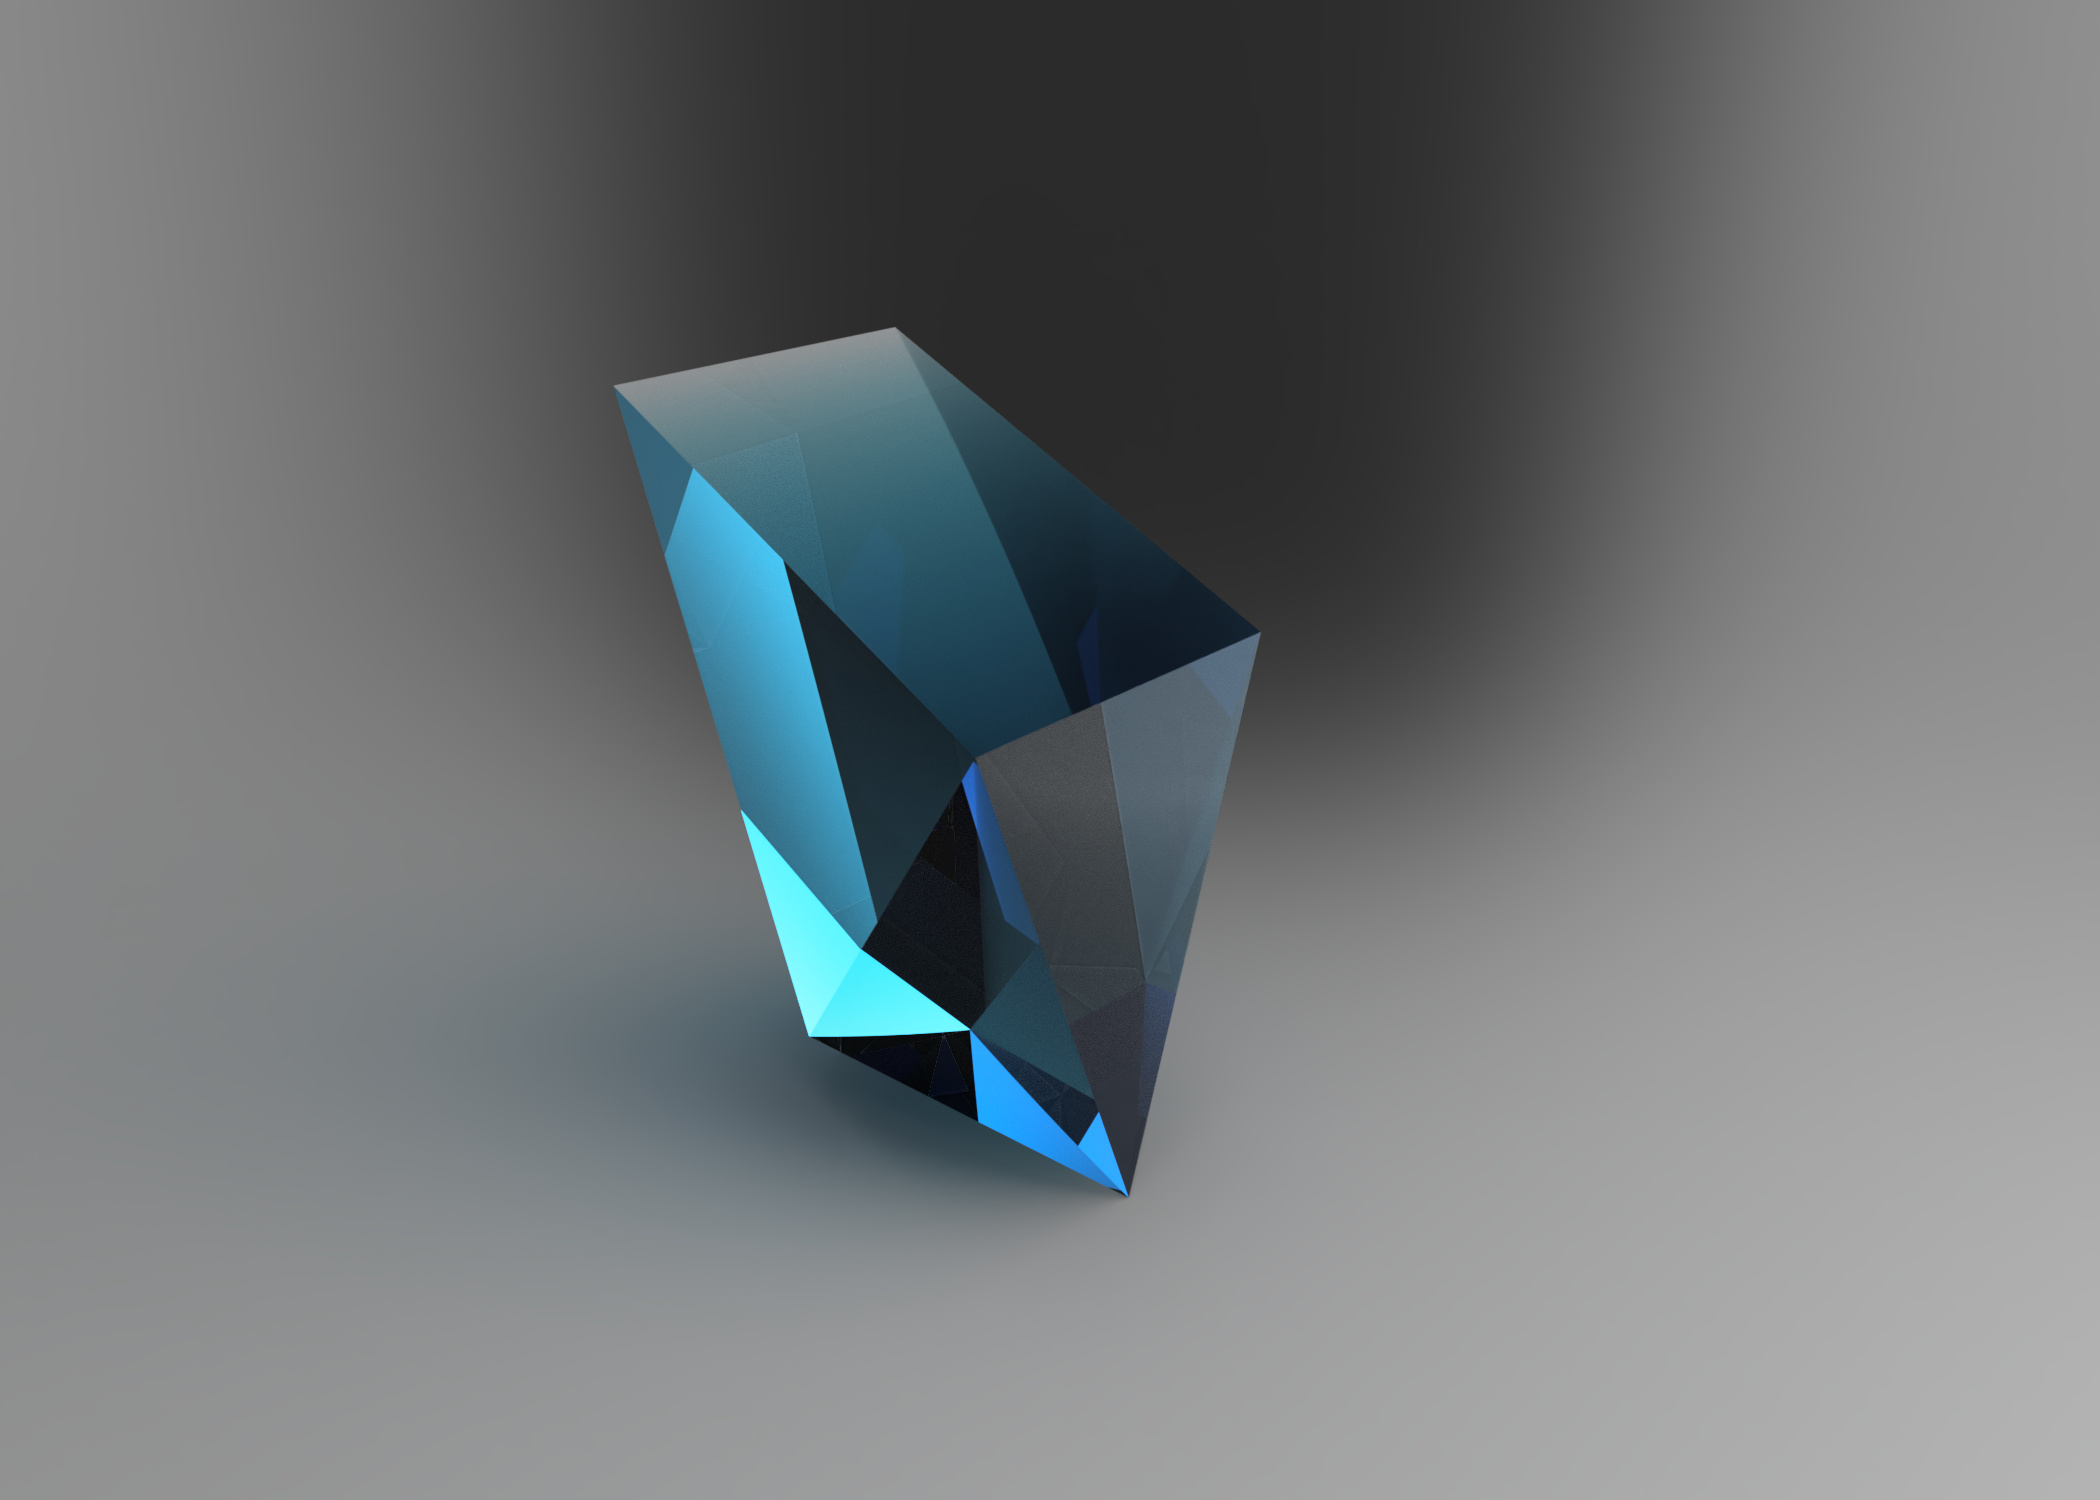 Blue Crystal by Gerry Murray, Size: 60cm 20cm 30cm, Material 3D Printed Vero Clear.